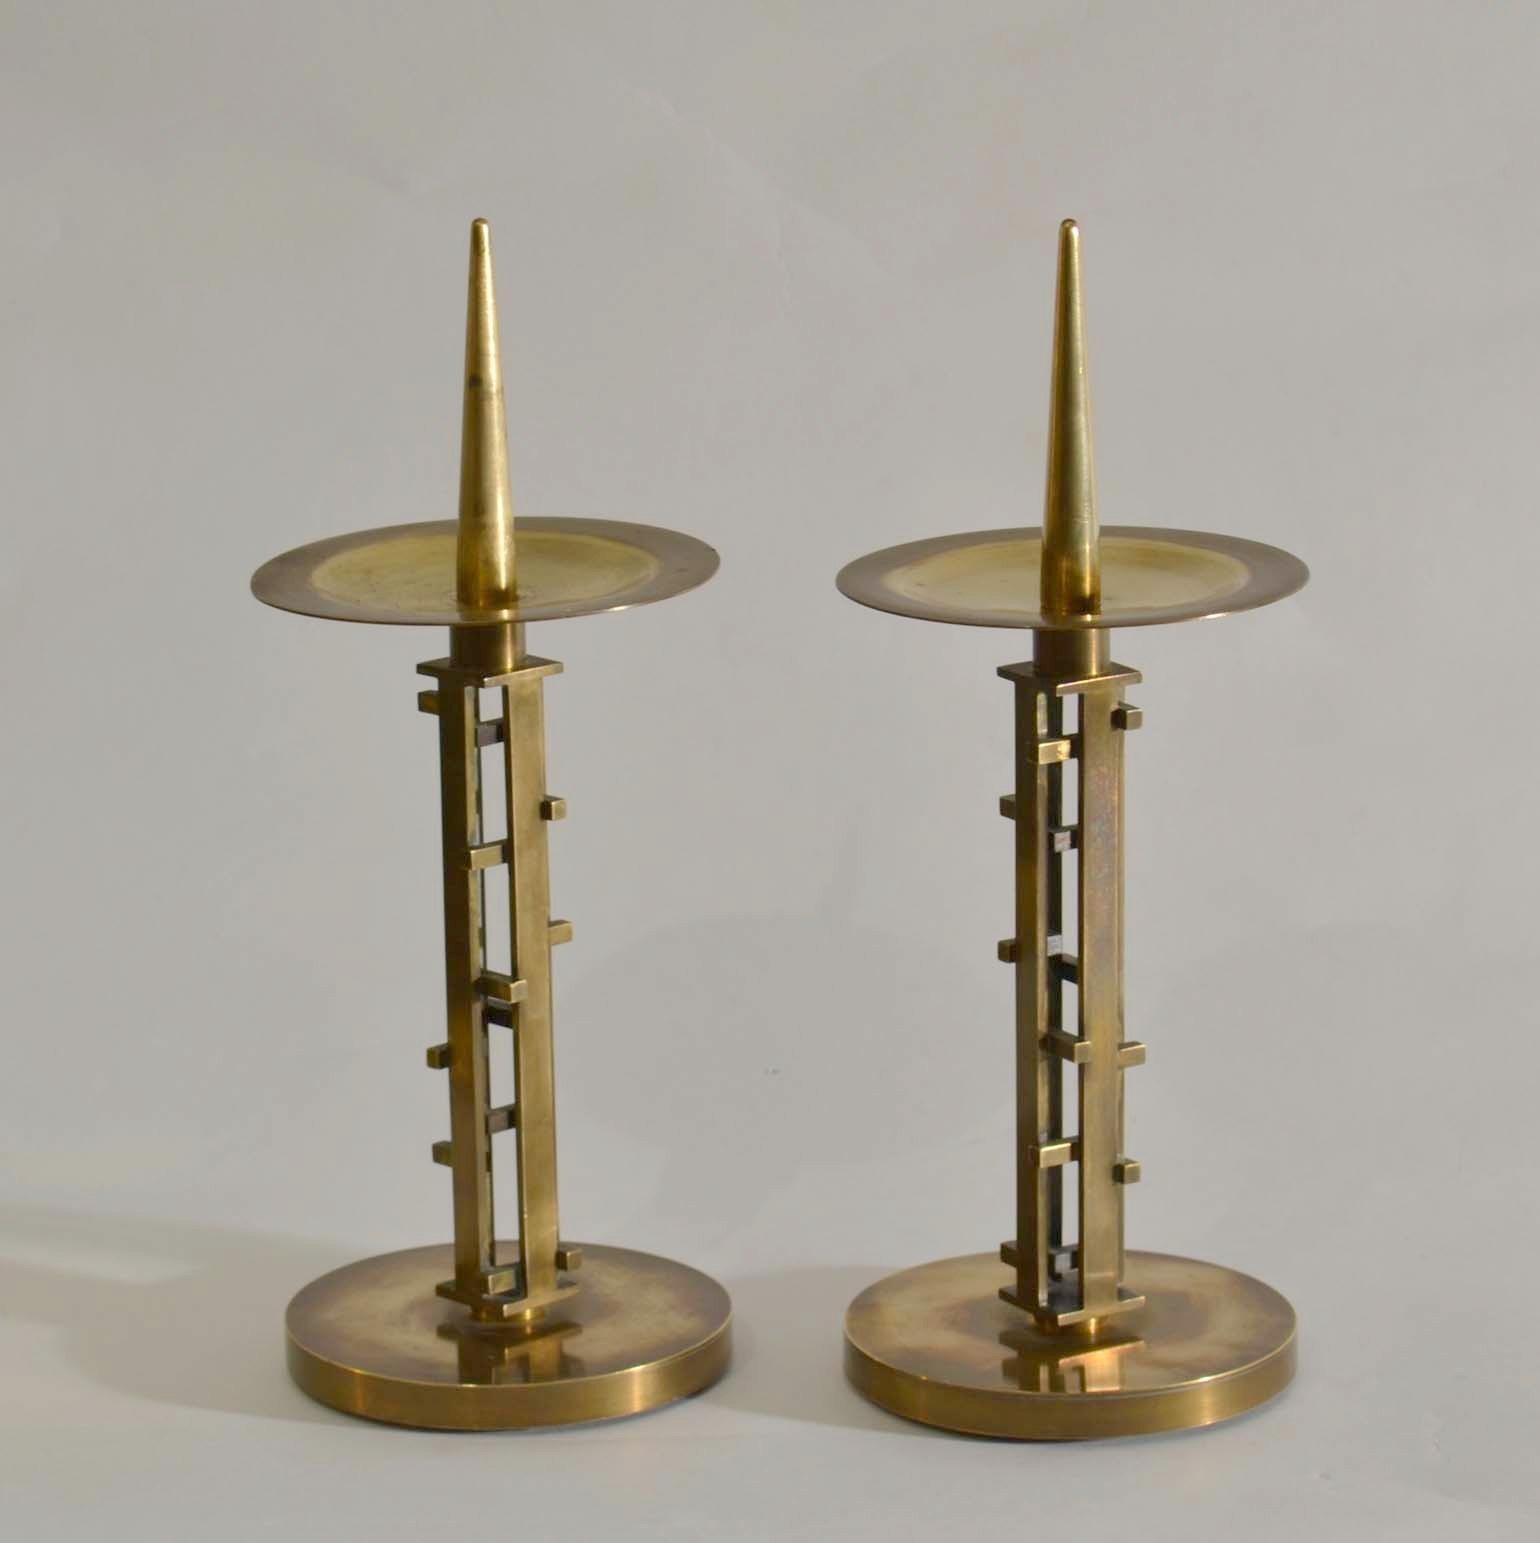 These  exquisite and distinctly designed candlesticks are commonly used in worship both for decoration and ambiance. Geometric sculptural pair of handcrafted candle holders were  assembled by a silversmith using advanced decorative techniques